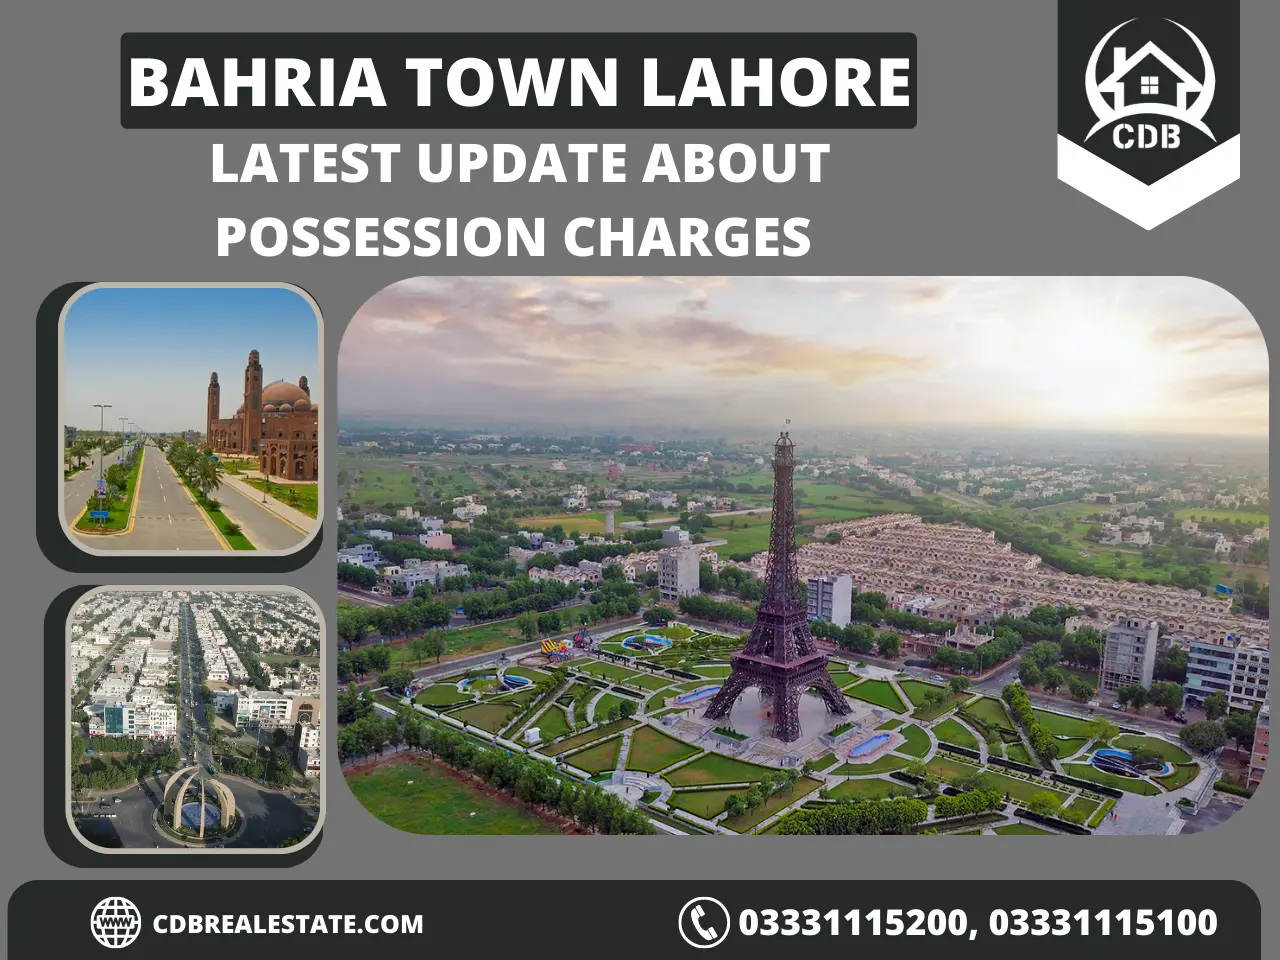 Bahria Town Lahore Latest Update About Possession Charges